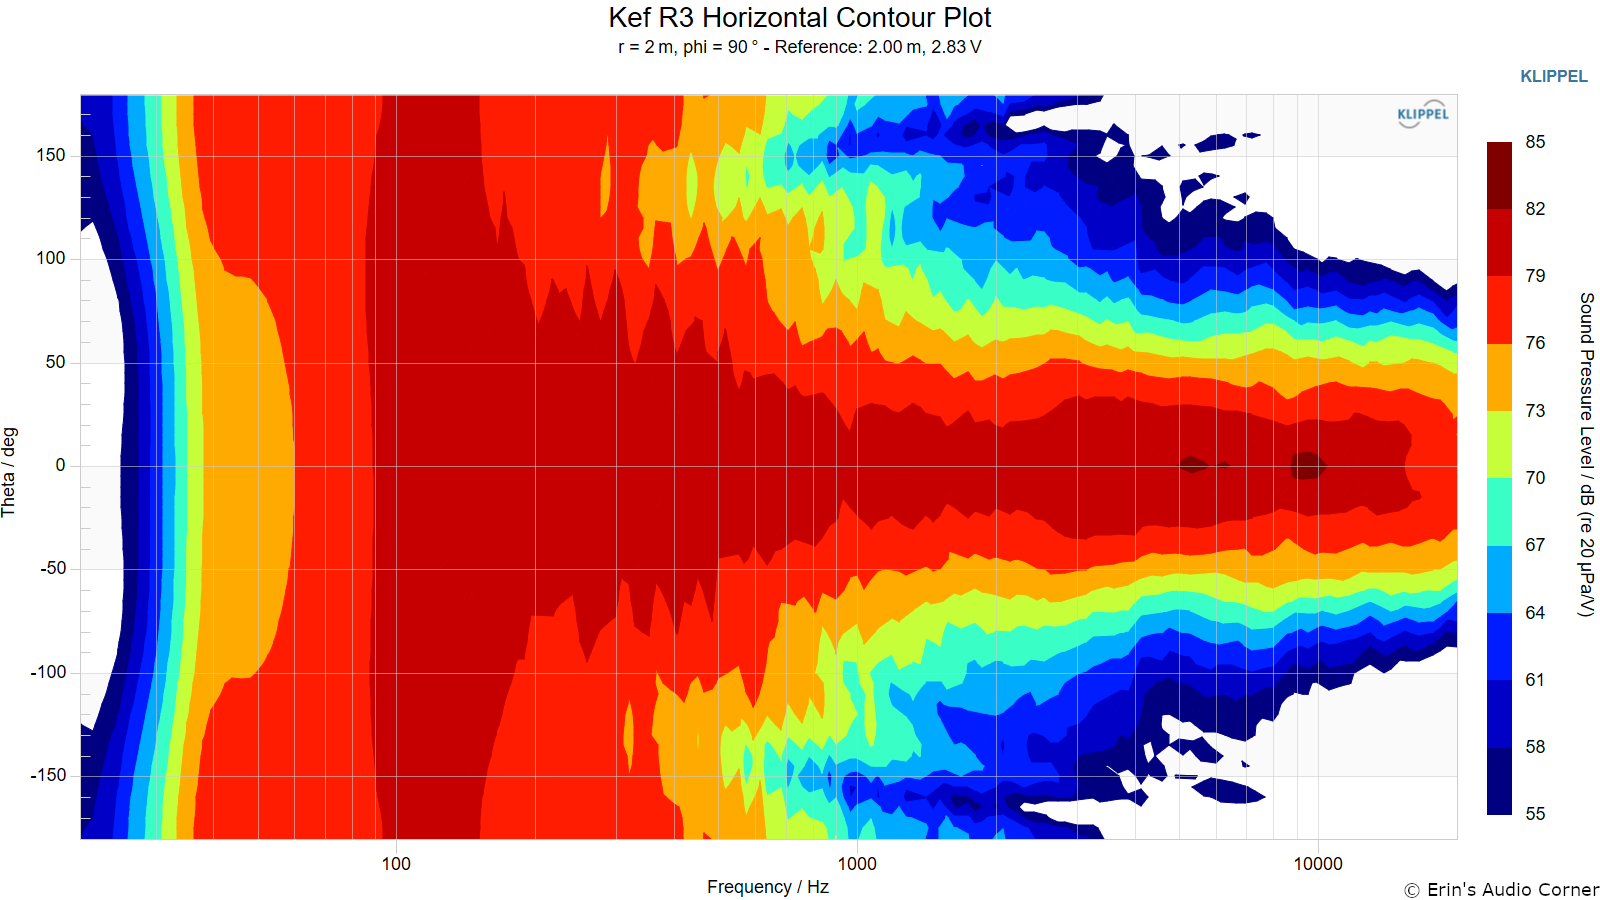 Kef%20R3%20Horizontal%20Contour%20Plot%20%28not%20normalized%29.png